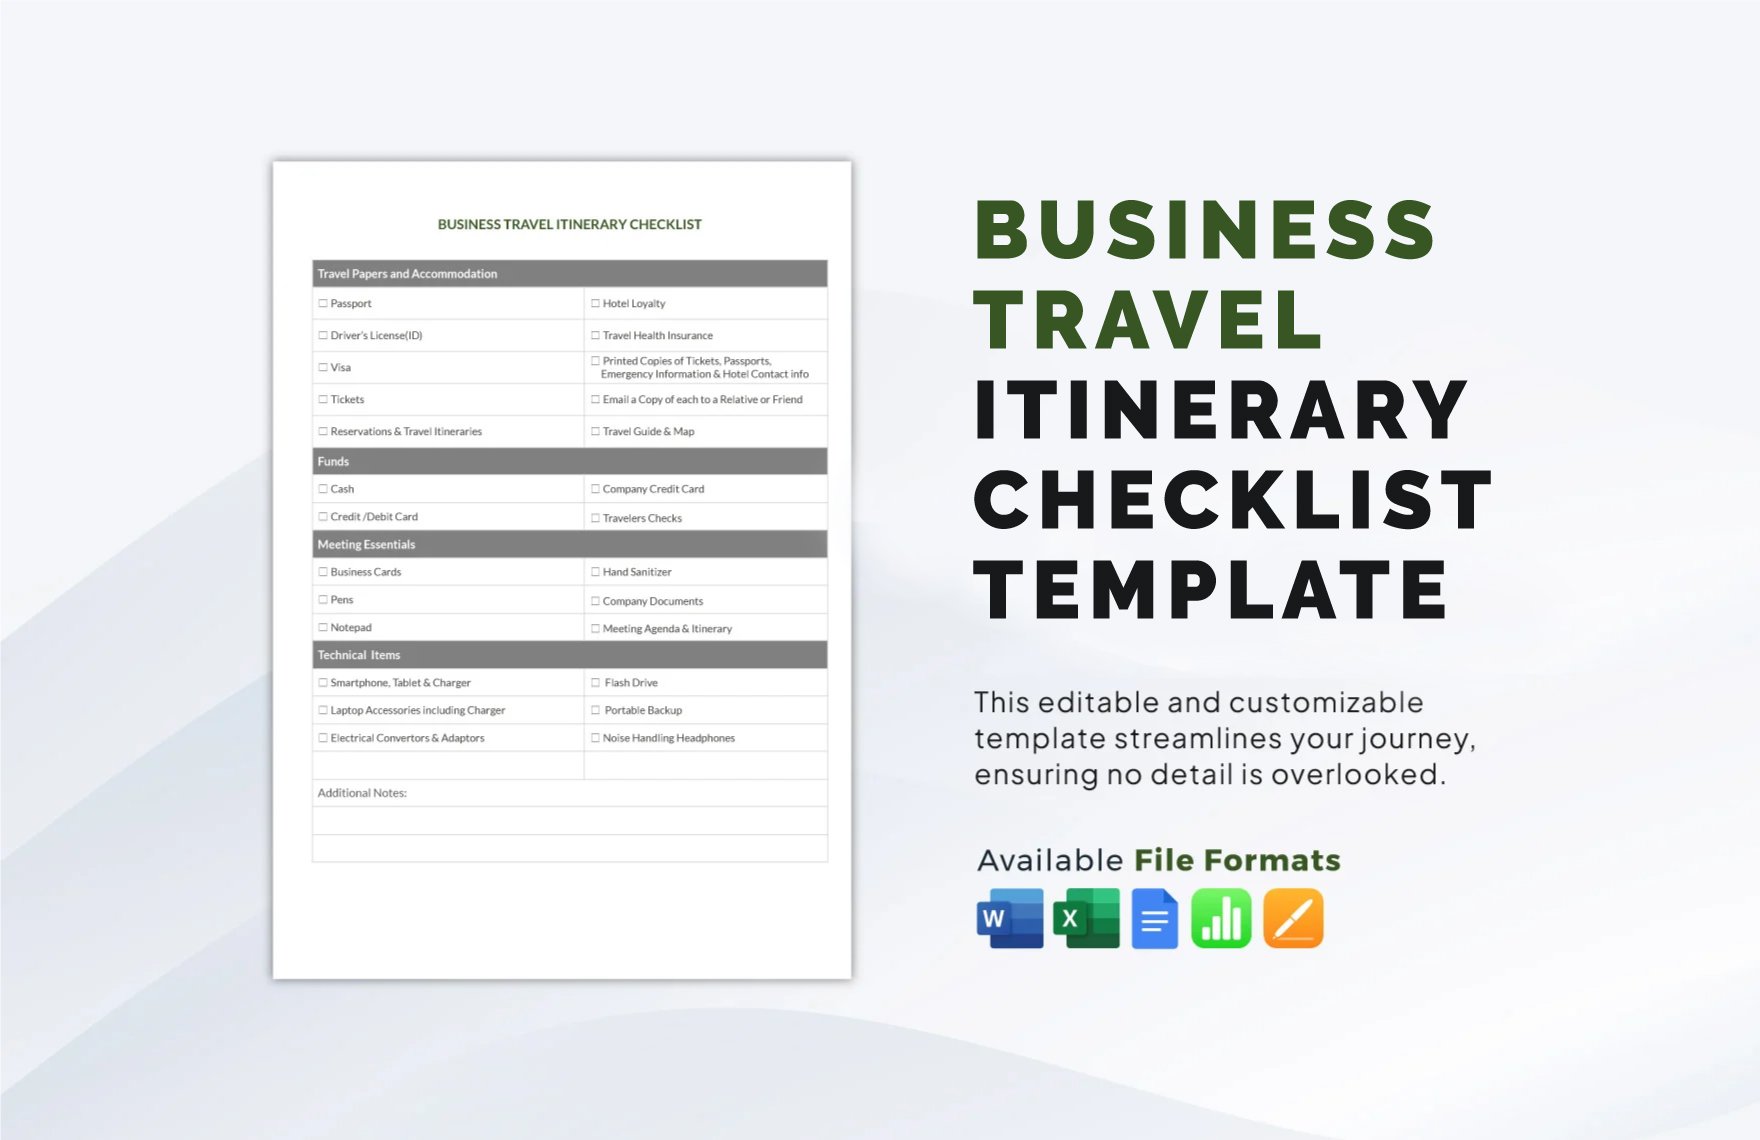 Free Business Travel Itinerary Checklist Template in Word, Google Docs, Excel, Apple Pages, Apple Numbers